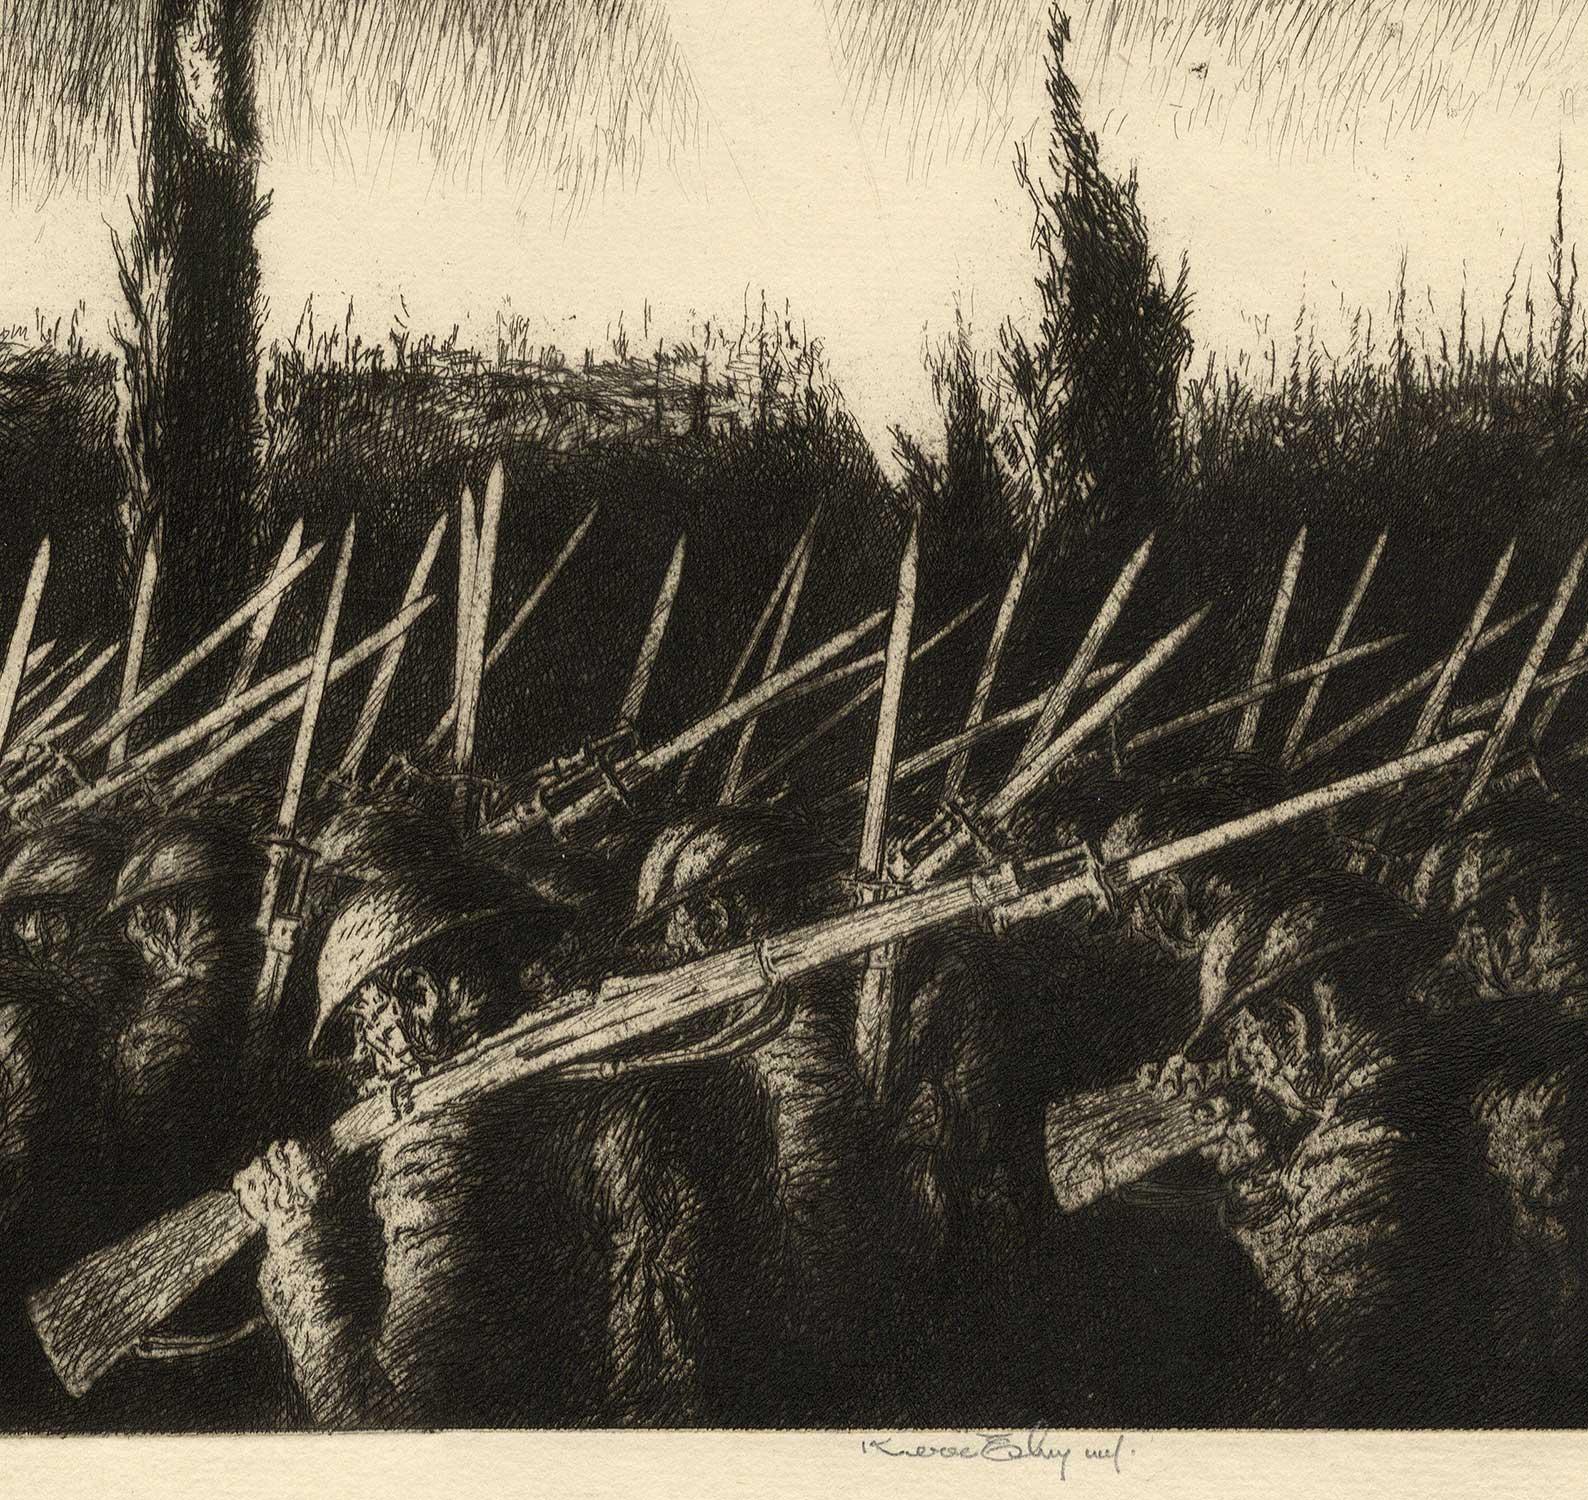 Barrage (Eby parallels WWI soldiers sacrifice with sacrifice of Christ on cross) - American Realist Print by Kerr Eby